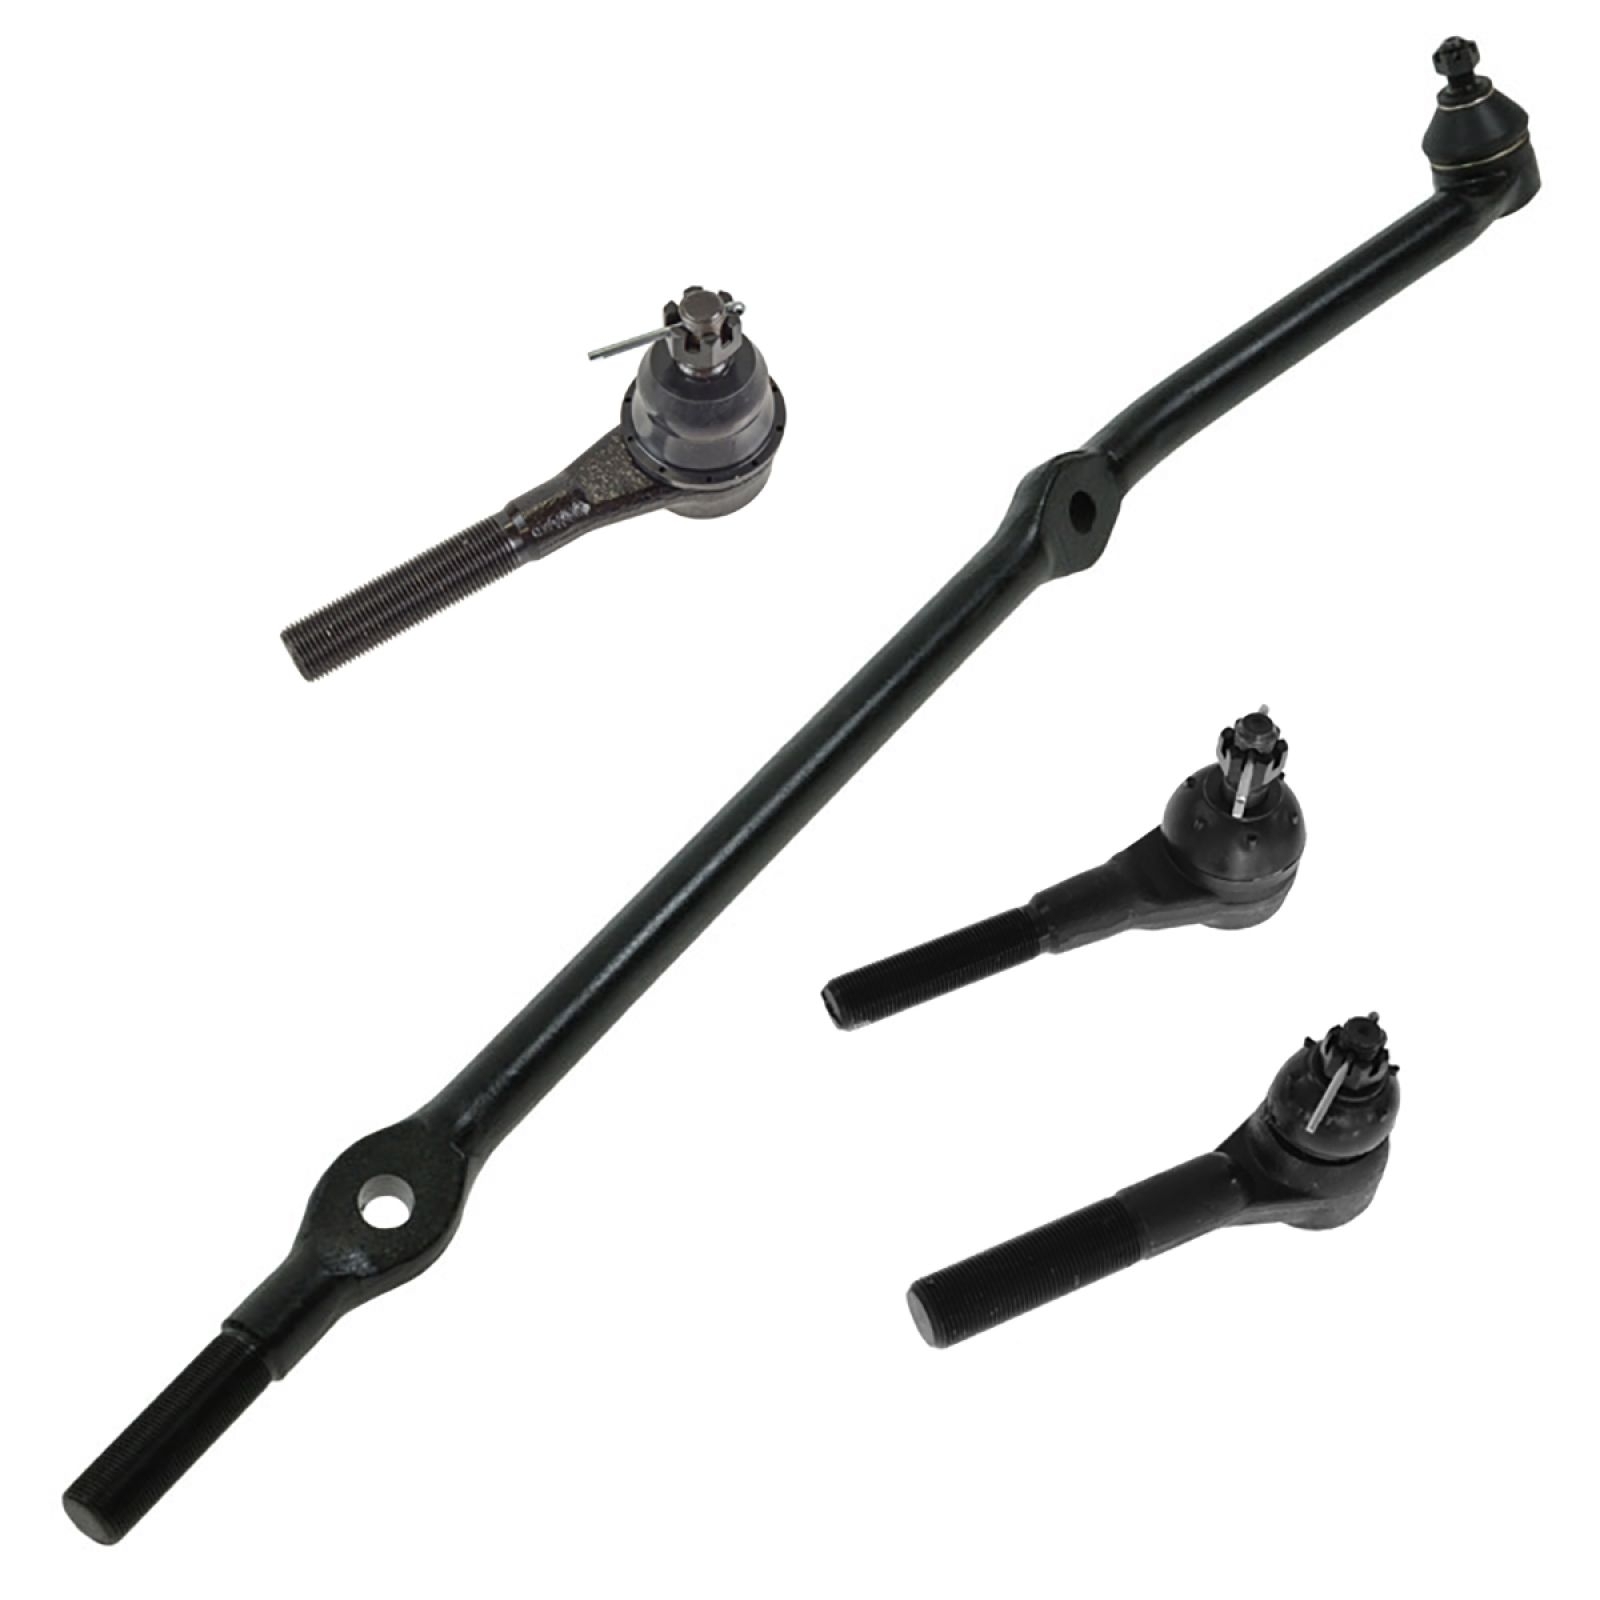 Trq 4 Piece Tie Rod Set For 93-98 Grand Cherokee For 4.0L Engine, Suspension Parts, HWNV-PSA55411